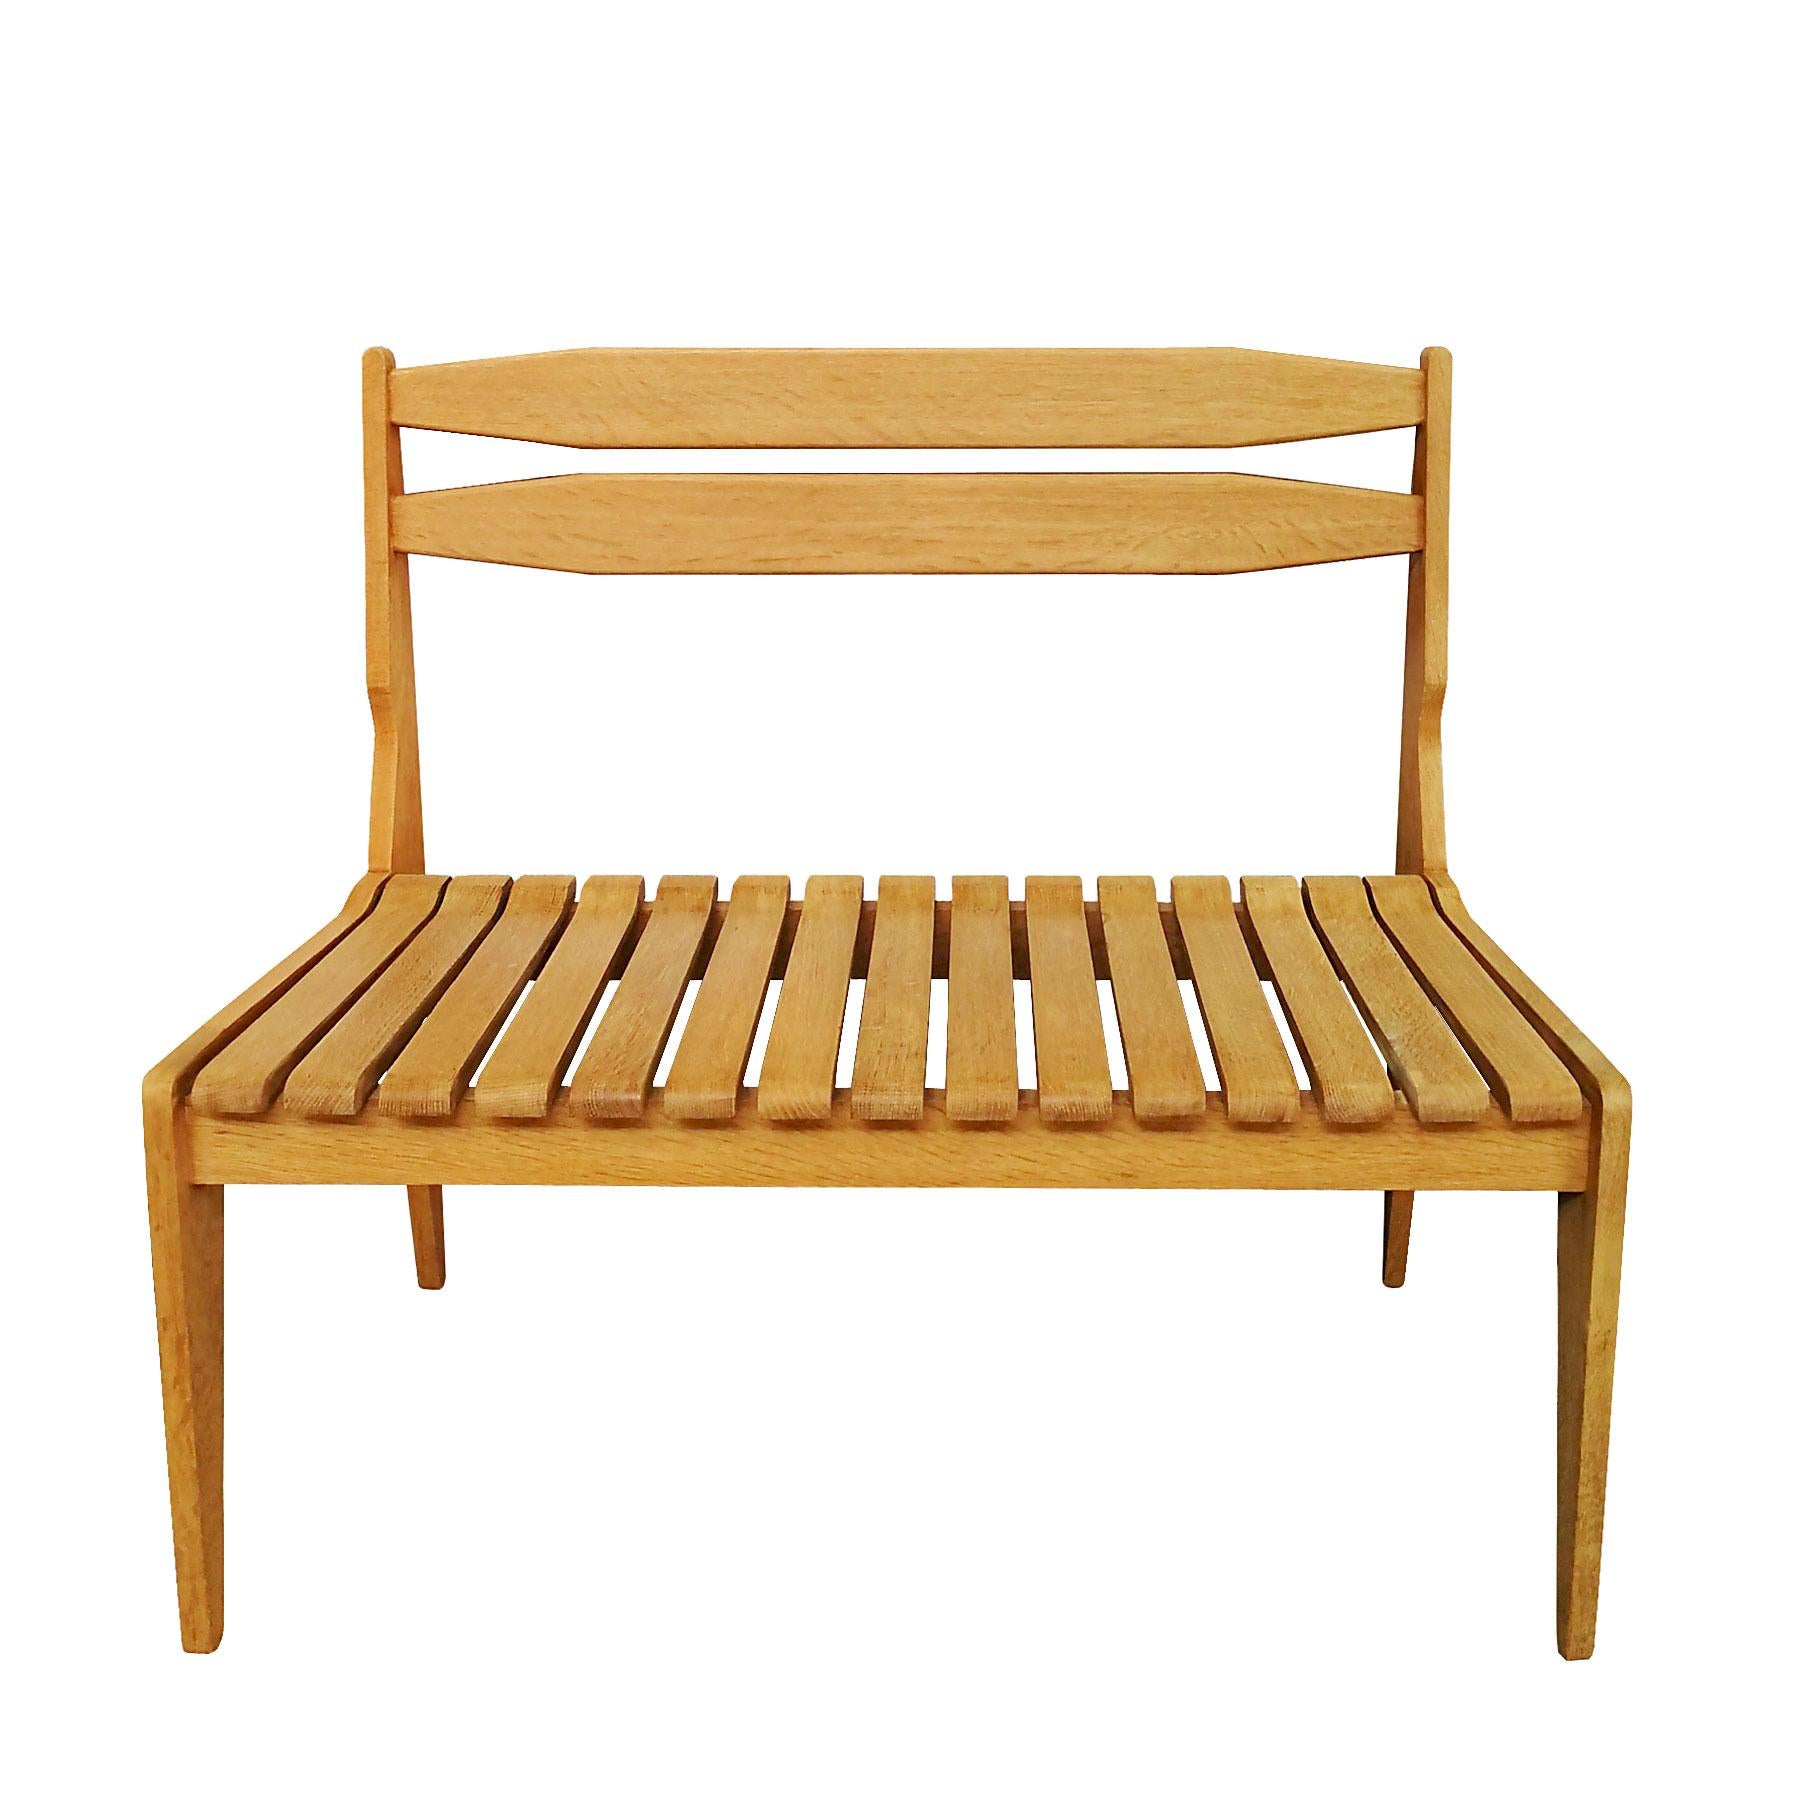 Pair of benches, solid waxed oakwood, perfect condition.
Design: Guillerme et Chambron
Maker: Votre Maison

France, circa 1960.